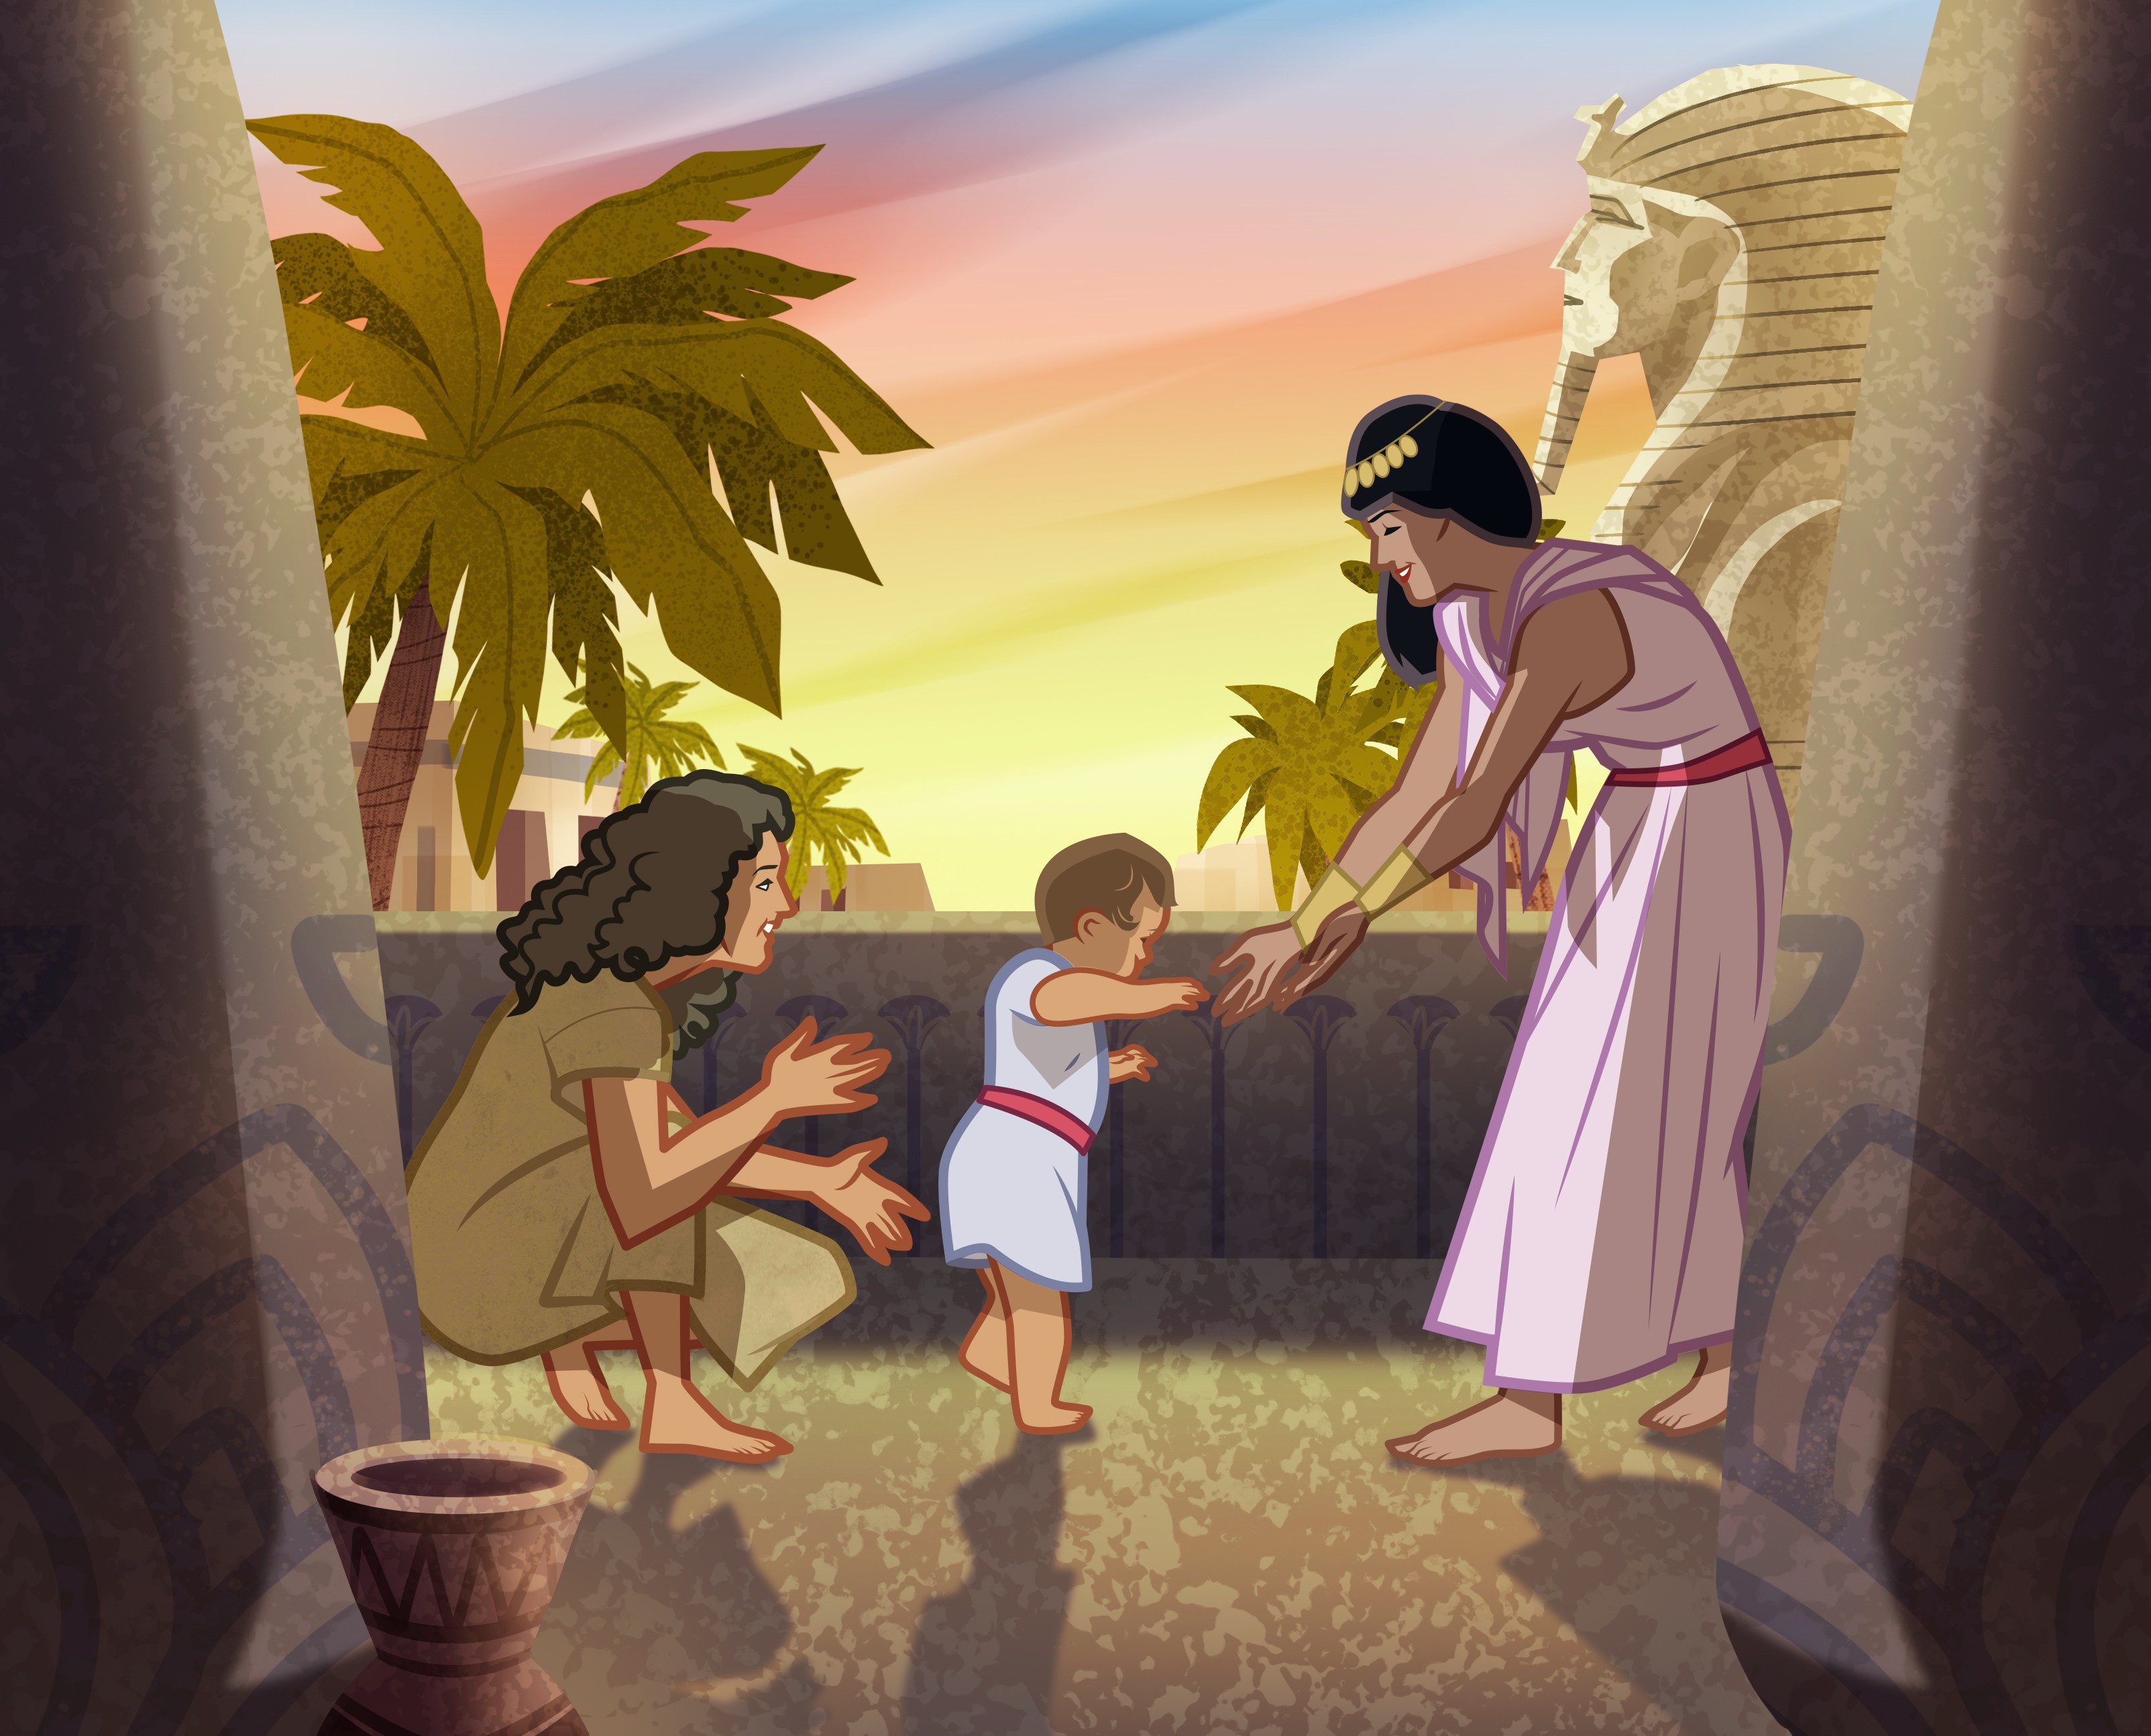 The Birth of Moses Bible Story Study Guide